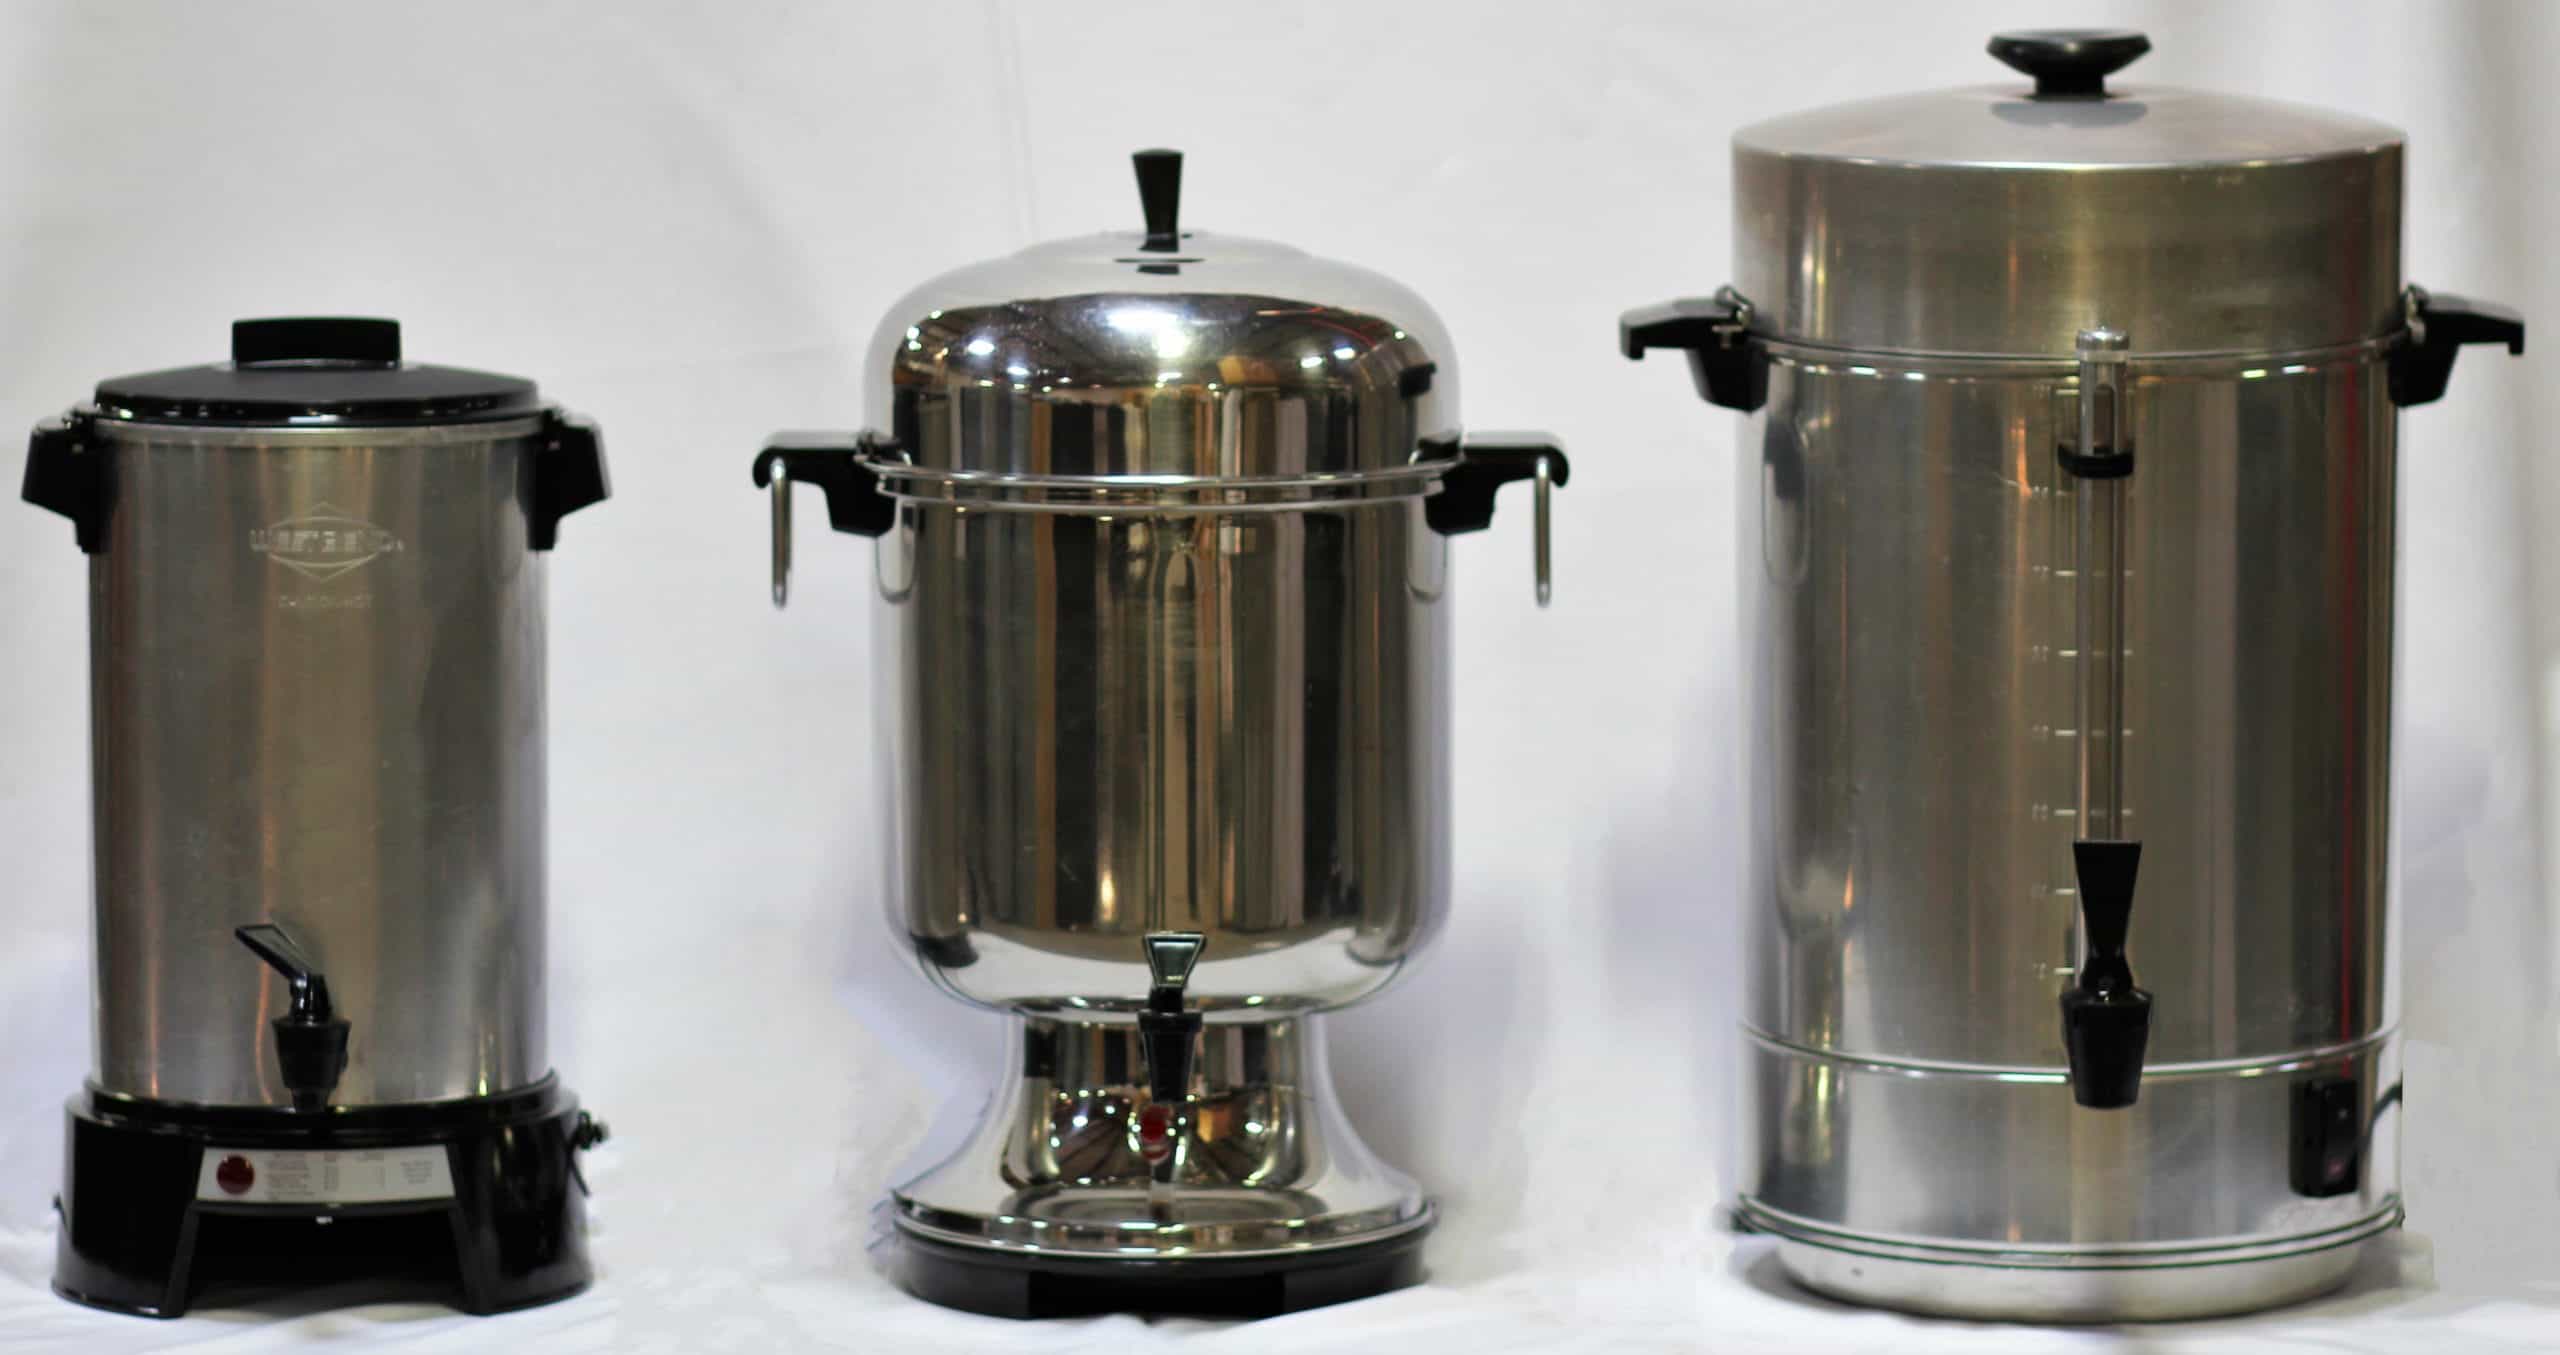 Three Coffee Urns Lined Up